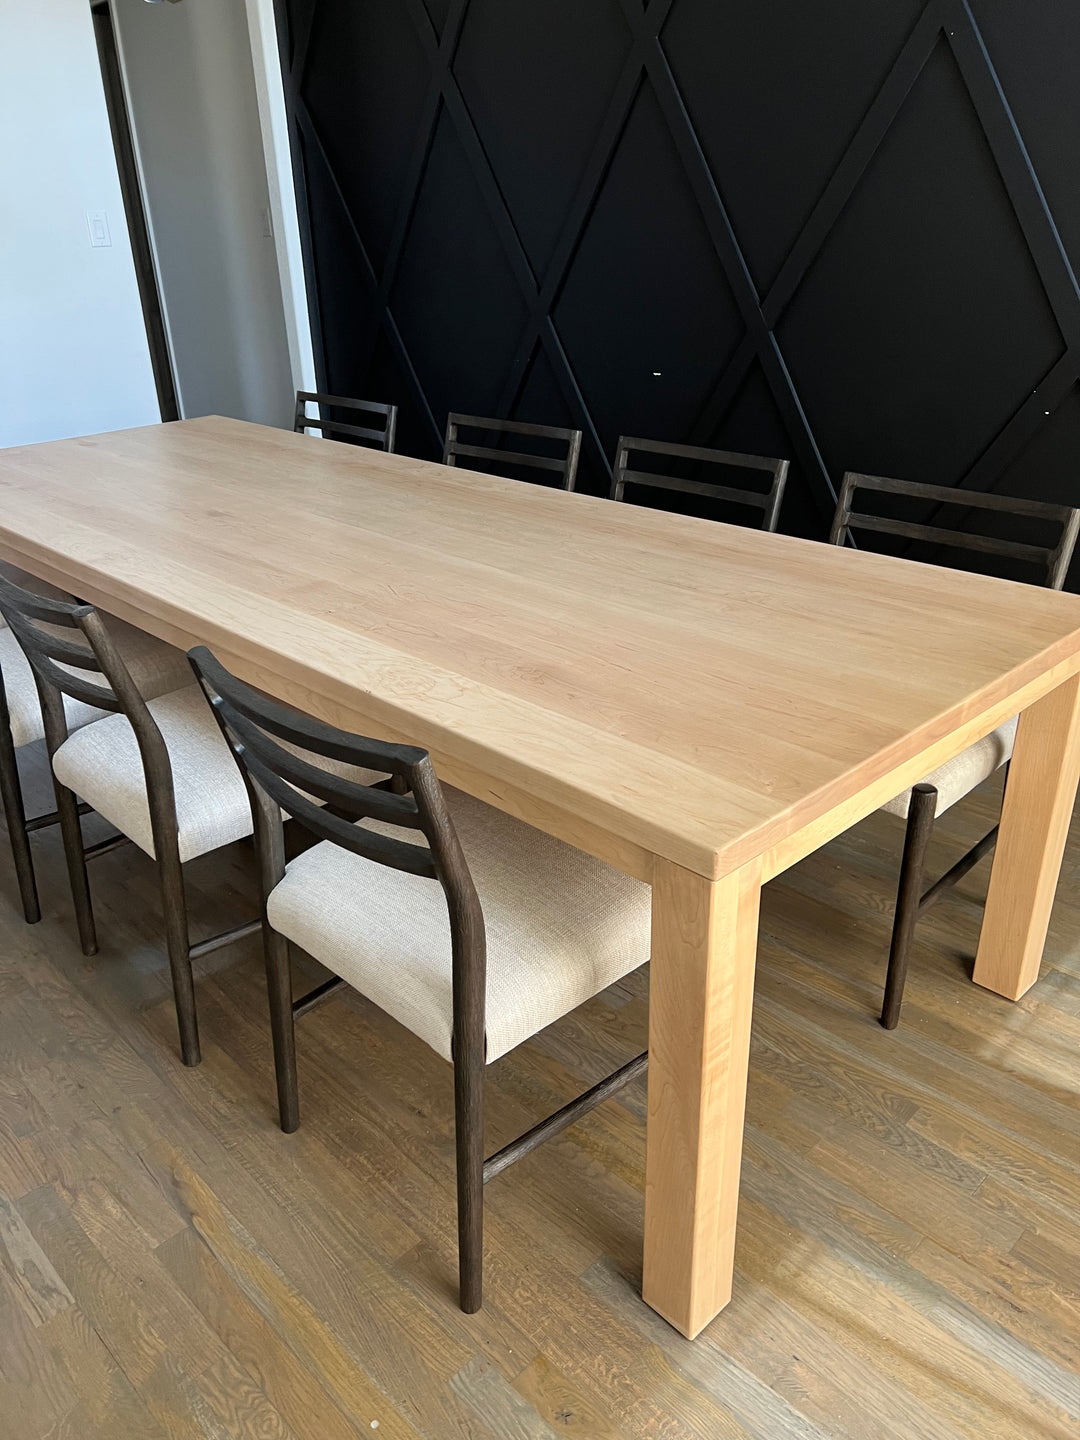 Large Four-Legged Dining Table